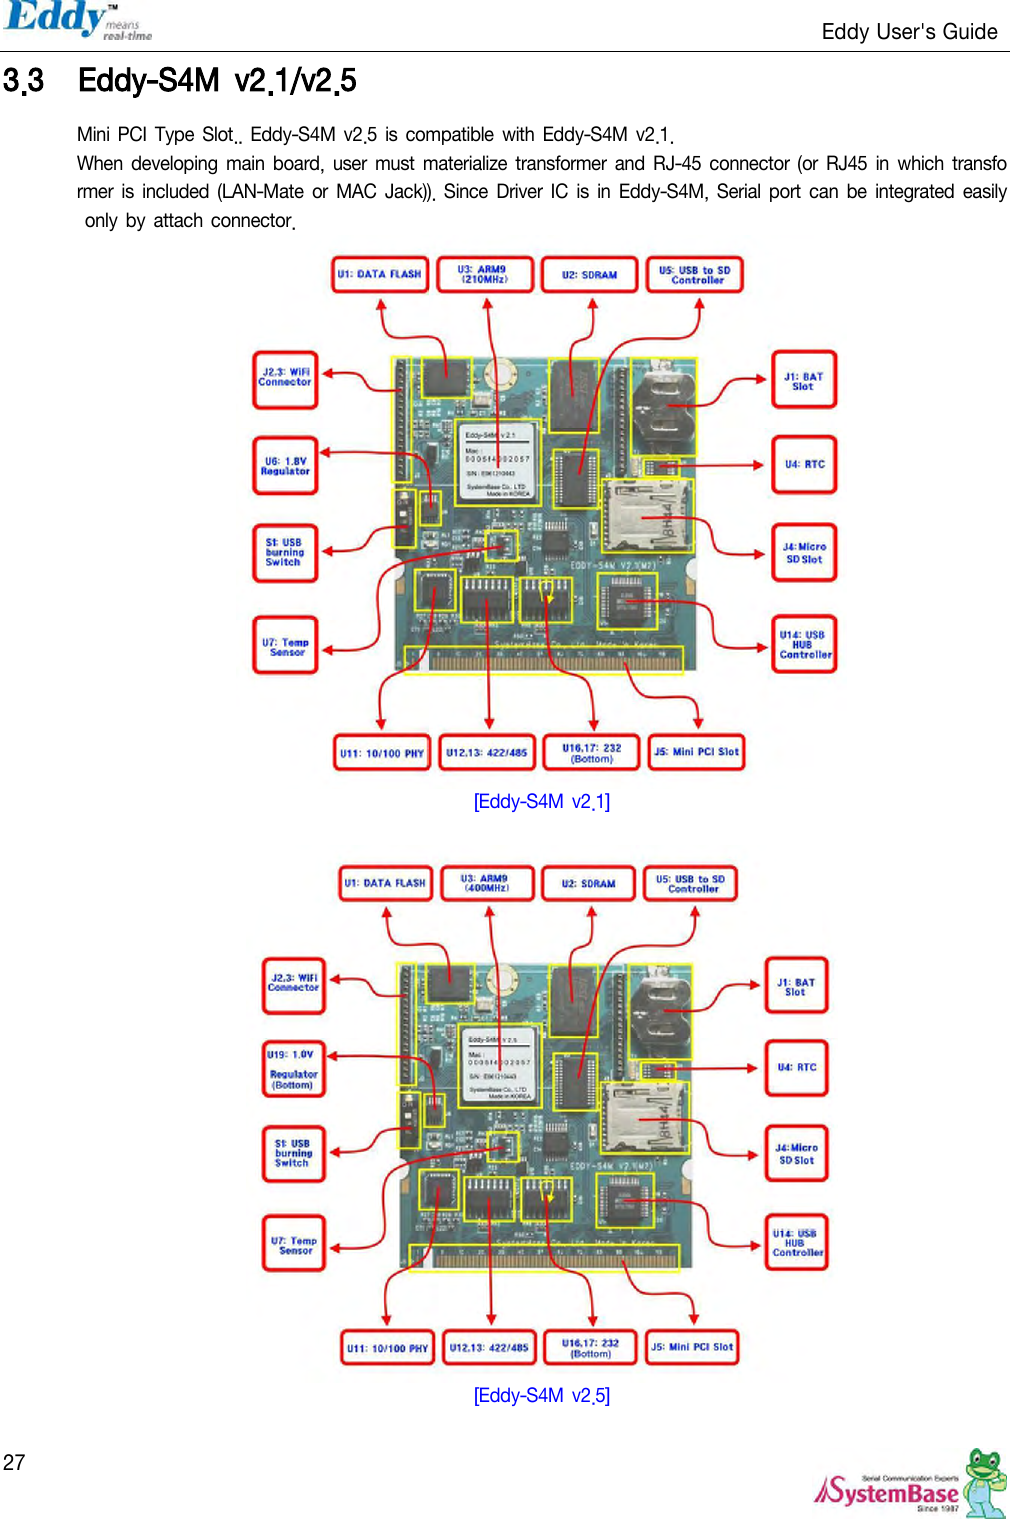                                                                   Eddy User&apos;s Guide   27 3.3 Eddy-S4M  v2.1/v2.5 Mini PCI Type Slot.. Eddy-S4M v2.5  is compatible  with  Eddy-S4M v2.1. When  developing main board,  user must  materialize transformer and RJ-45 connector (or RJ45 in which transformer  is included  (LAN-Mate or MAC Jack)). Since Driver IC  is in Eddy-S4M,  Serial  port can be integrated easily only  by  attach connector.  [Eddy-S4M v2.1]   [Eddy-S4M v2.5]  